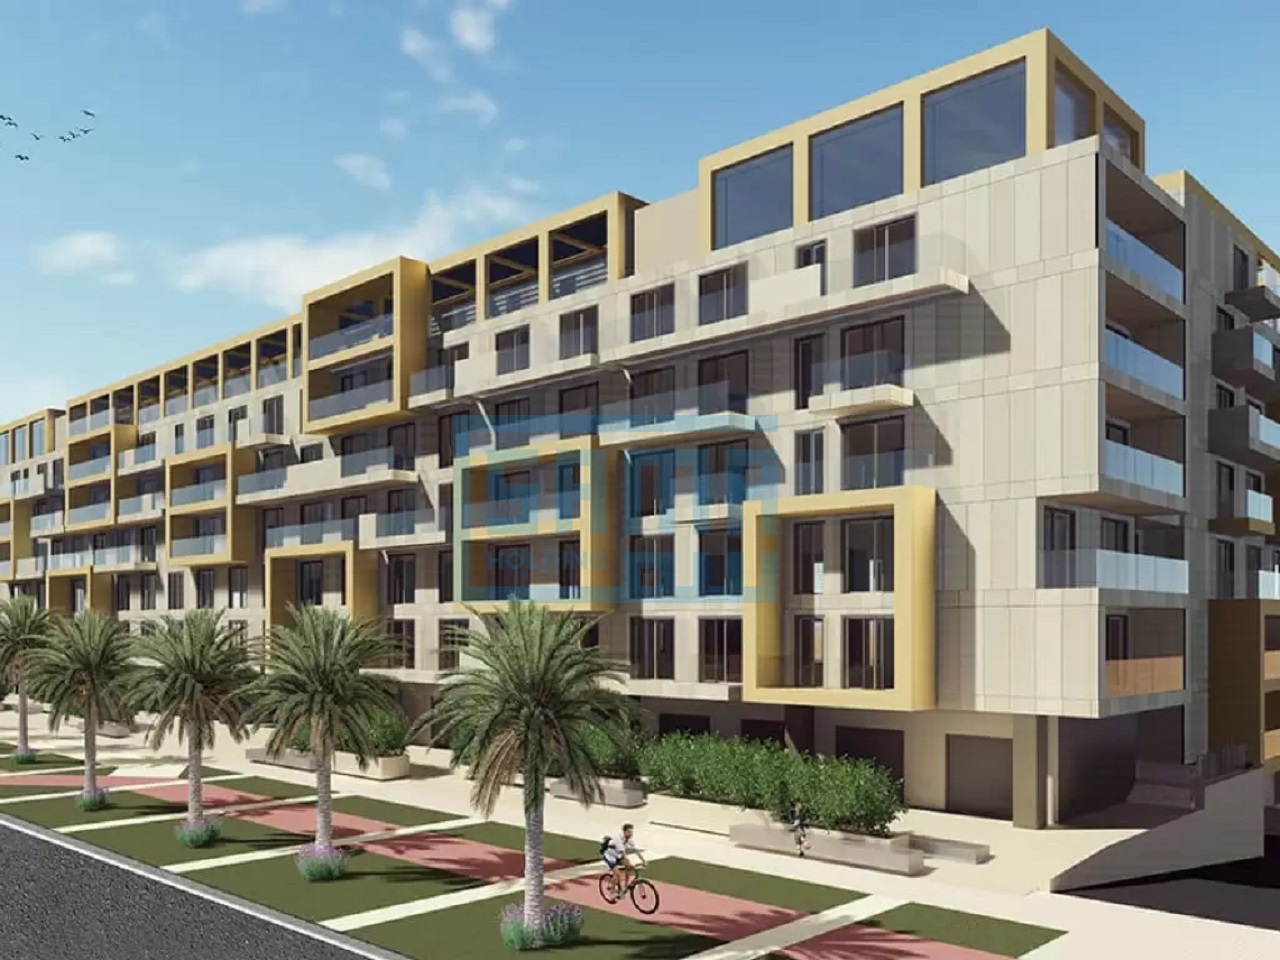 Furnished 2 Bedroom Apartment for Sale in Abu Dhabi in Al Raha Lofts 2, Abu Dhabi - Completed